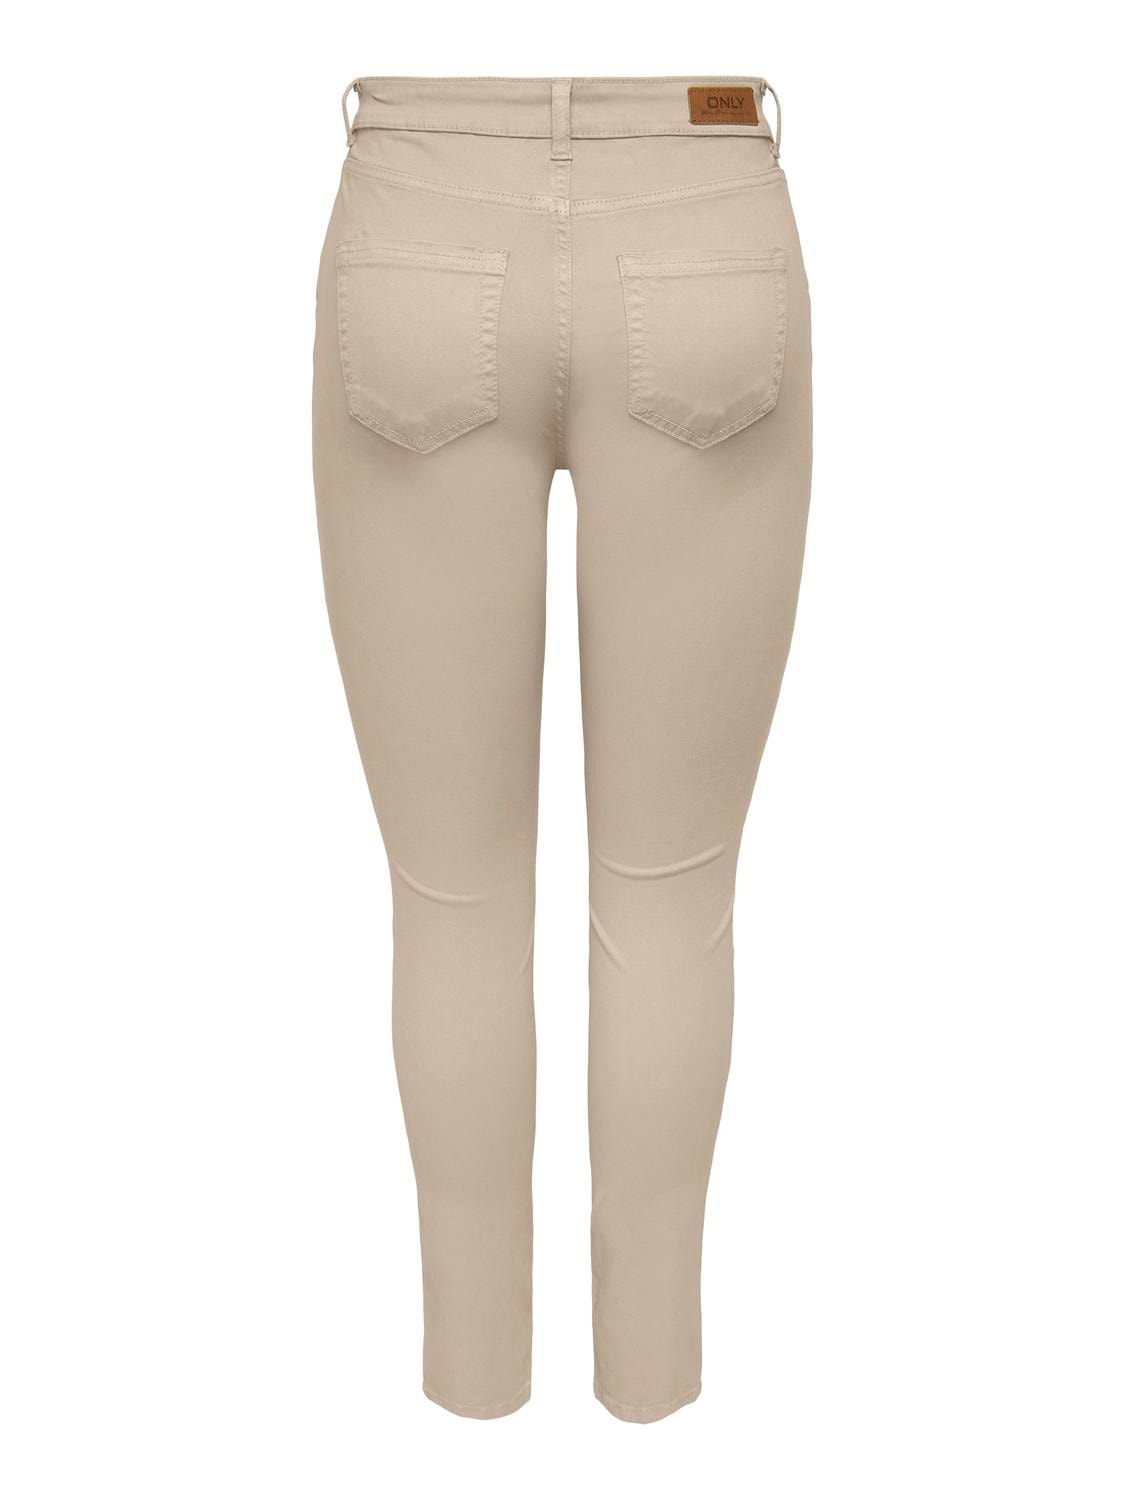 ONLY Normal geschnitten Hohe Taille Hose -Oxford Tan - 15278924